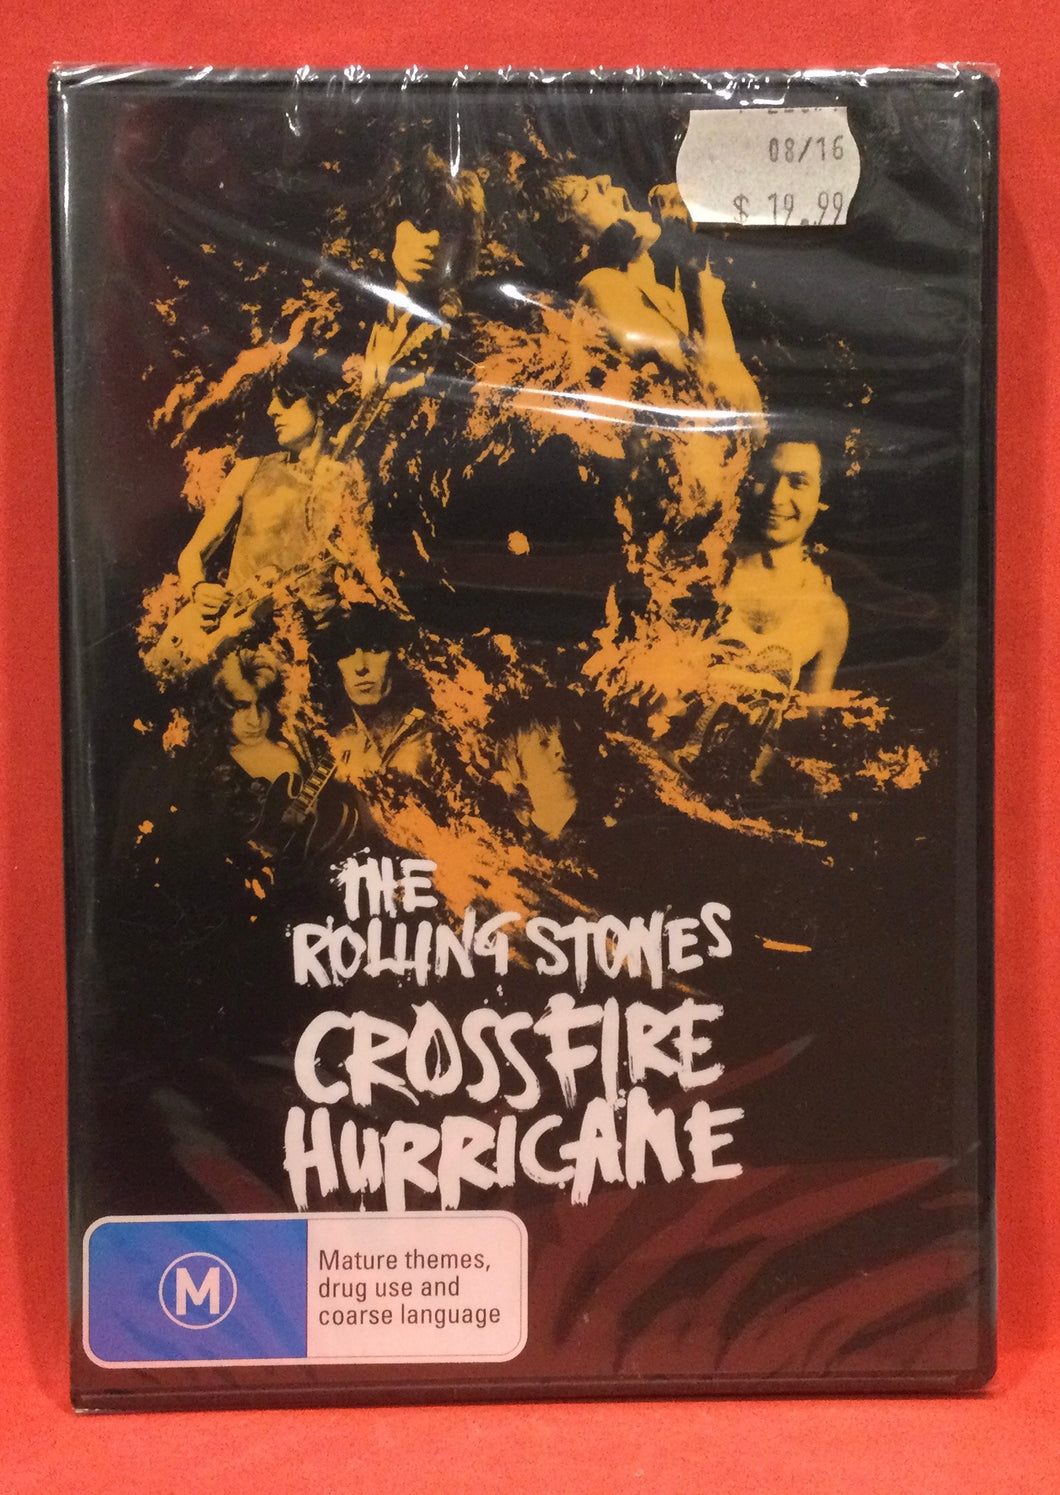 CROSSFIRE HURRICANE - THE ROLLING STONES - DVD 2012 (SEALED)